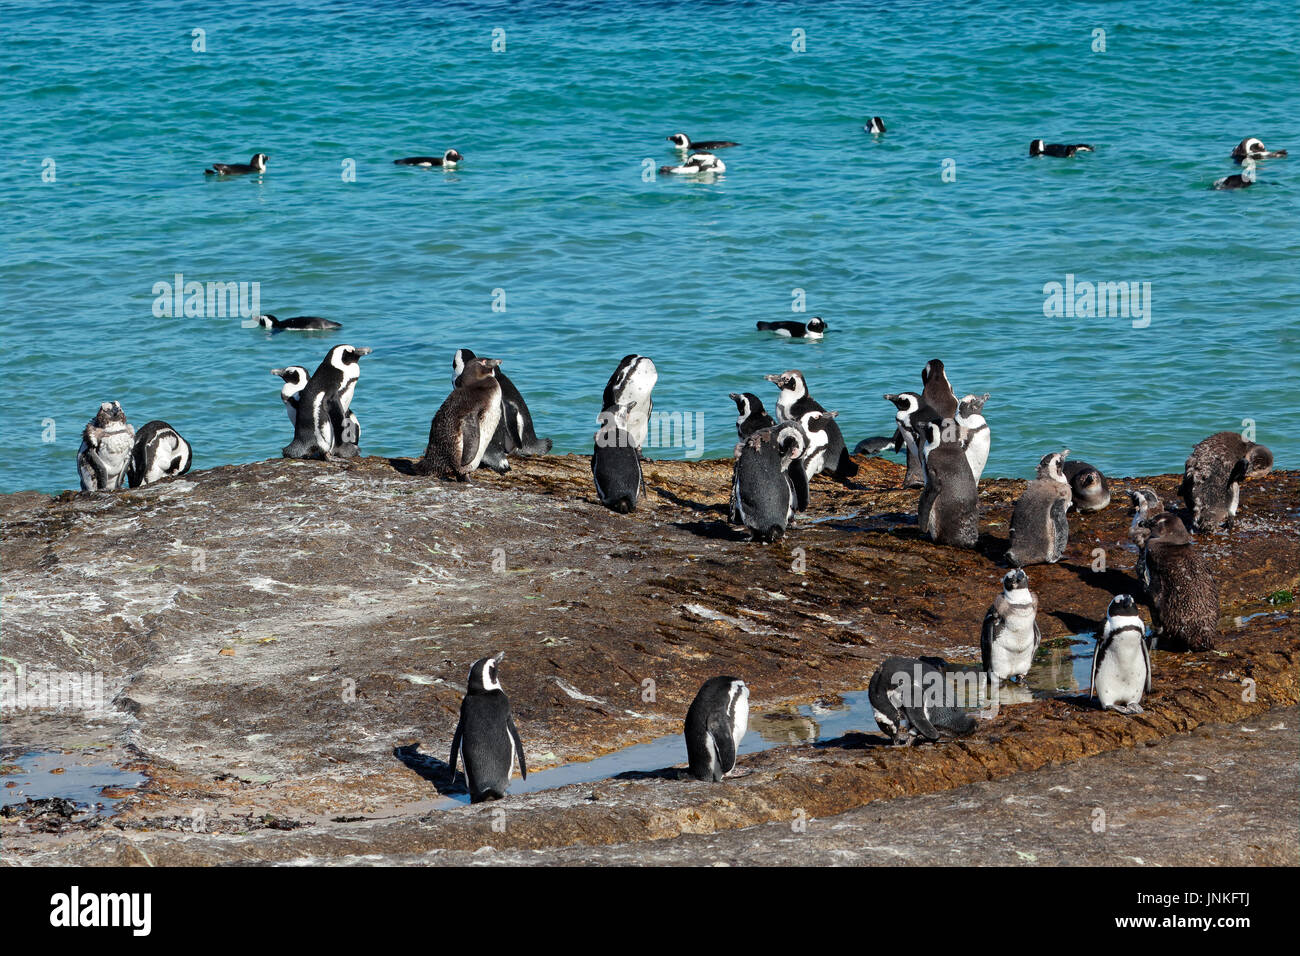 Group of African penguins (Spheniscus demersus) sitting on coastal rocks, Western Cape, South Africa Stock Photo